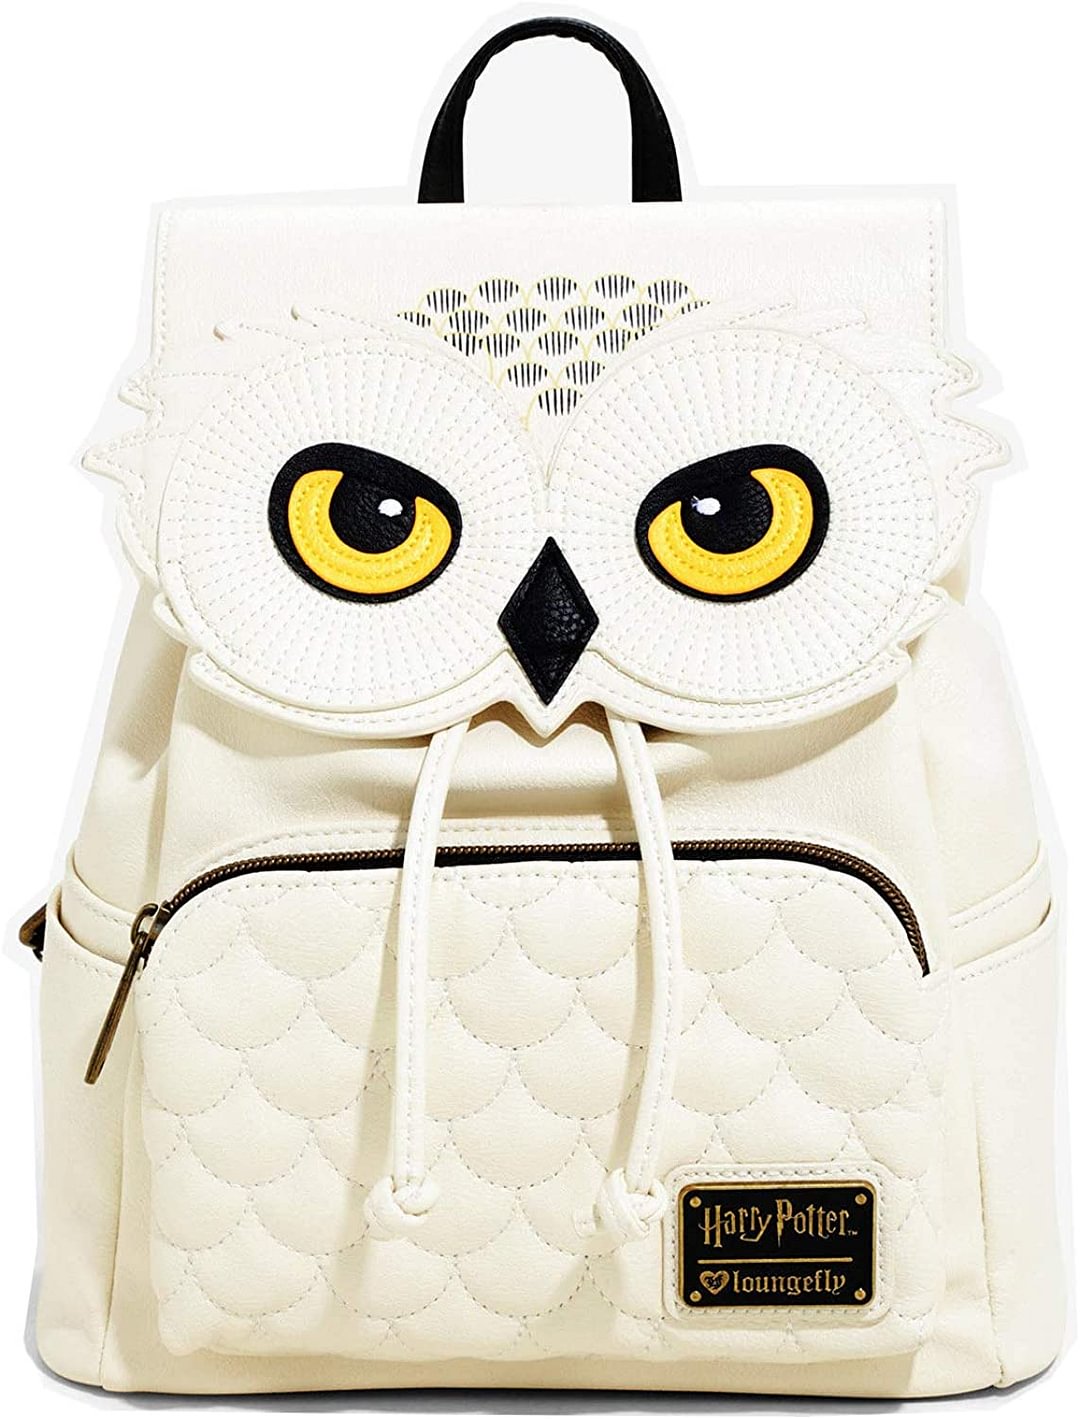 Potter Hedwig the Owl Mini Backpack (One Size Beige)